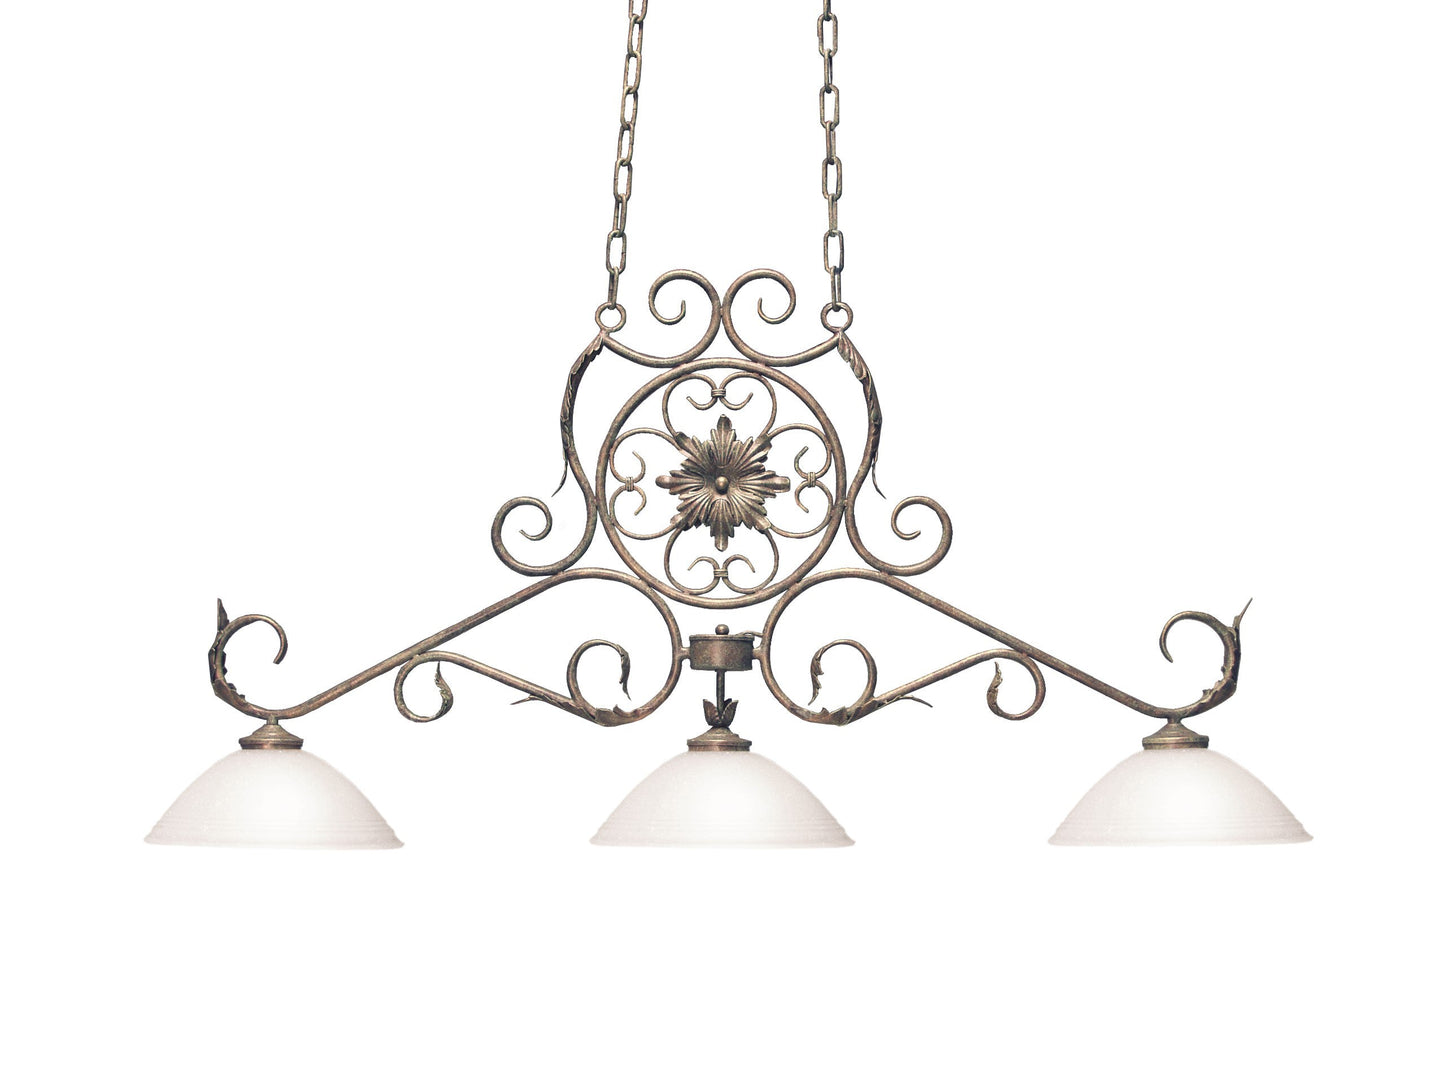 54" Christabel Oblong Pendant by 2nd Ave Lighting